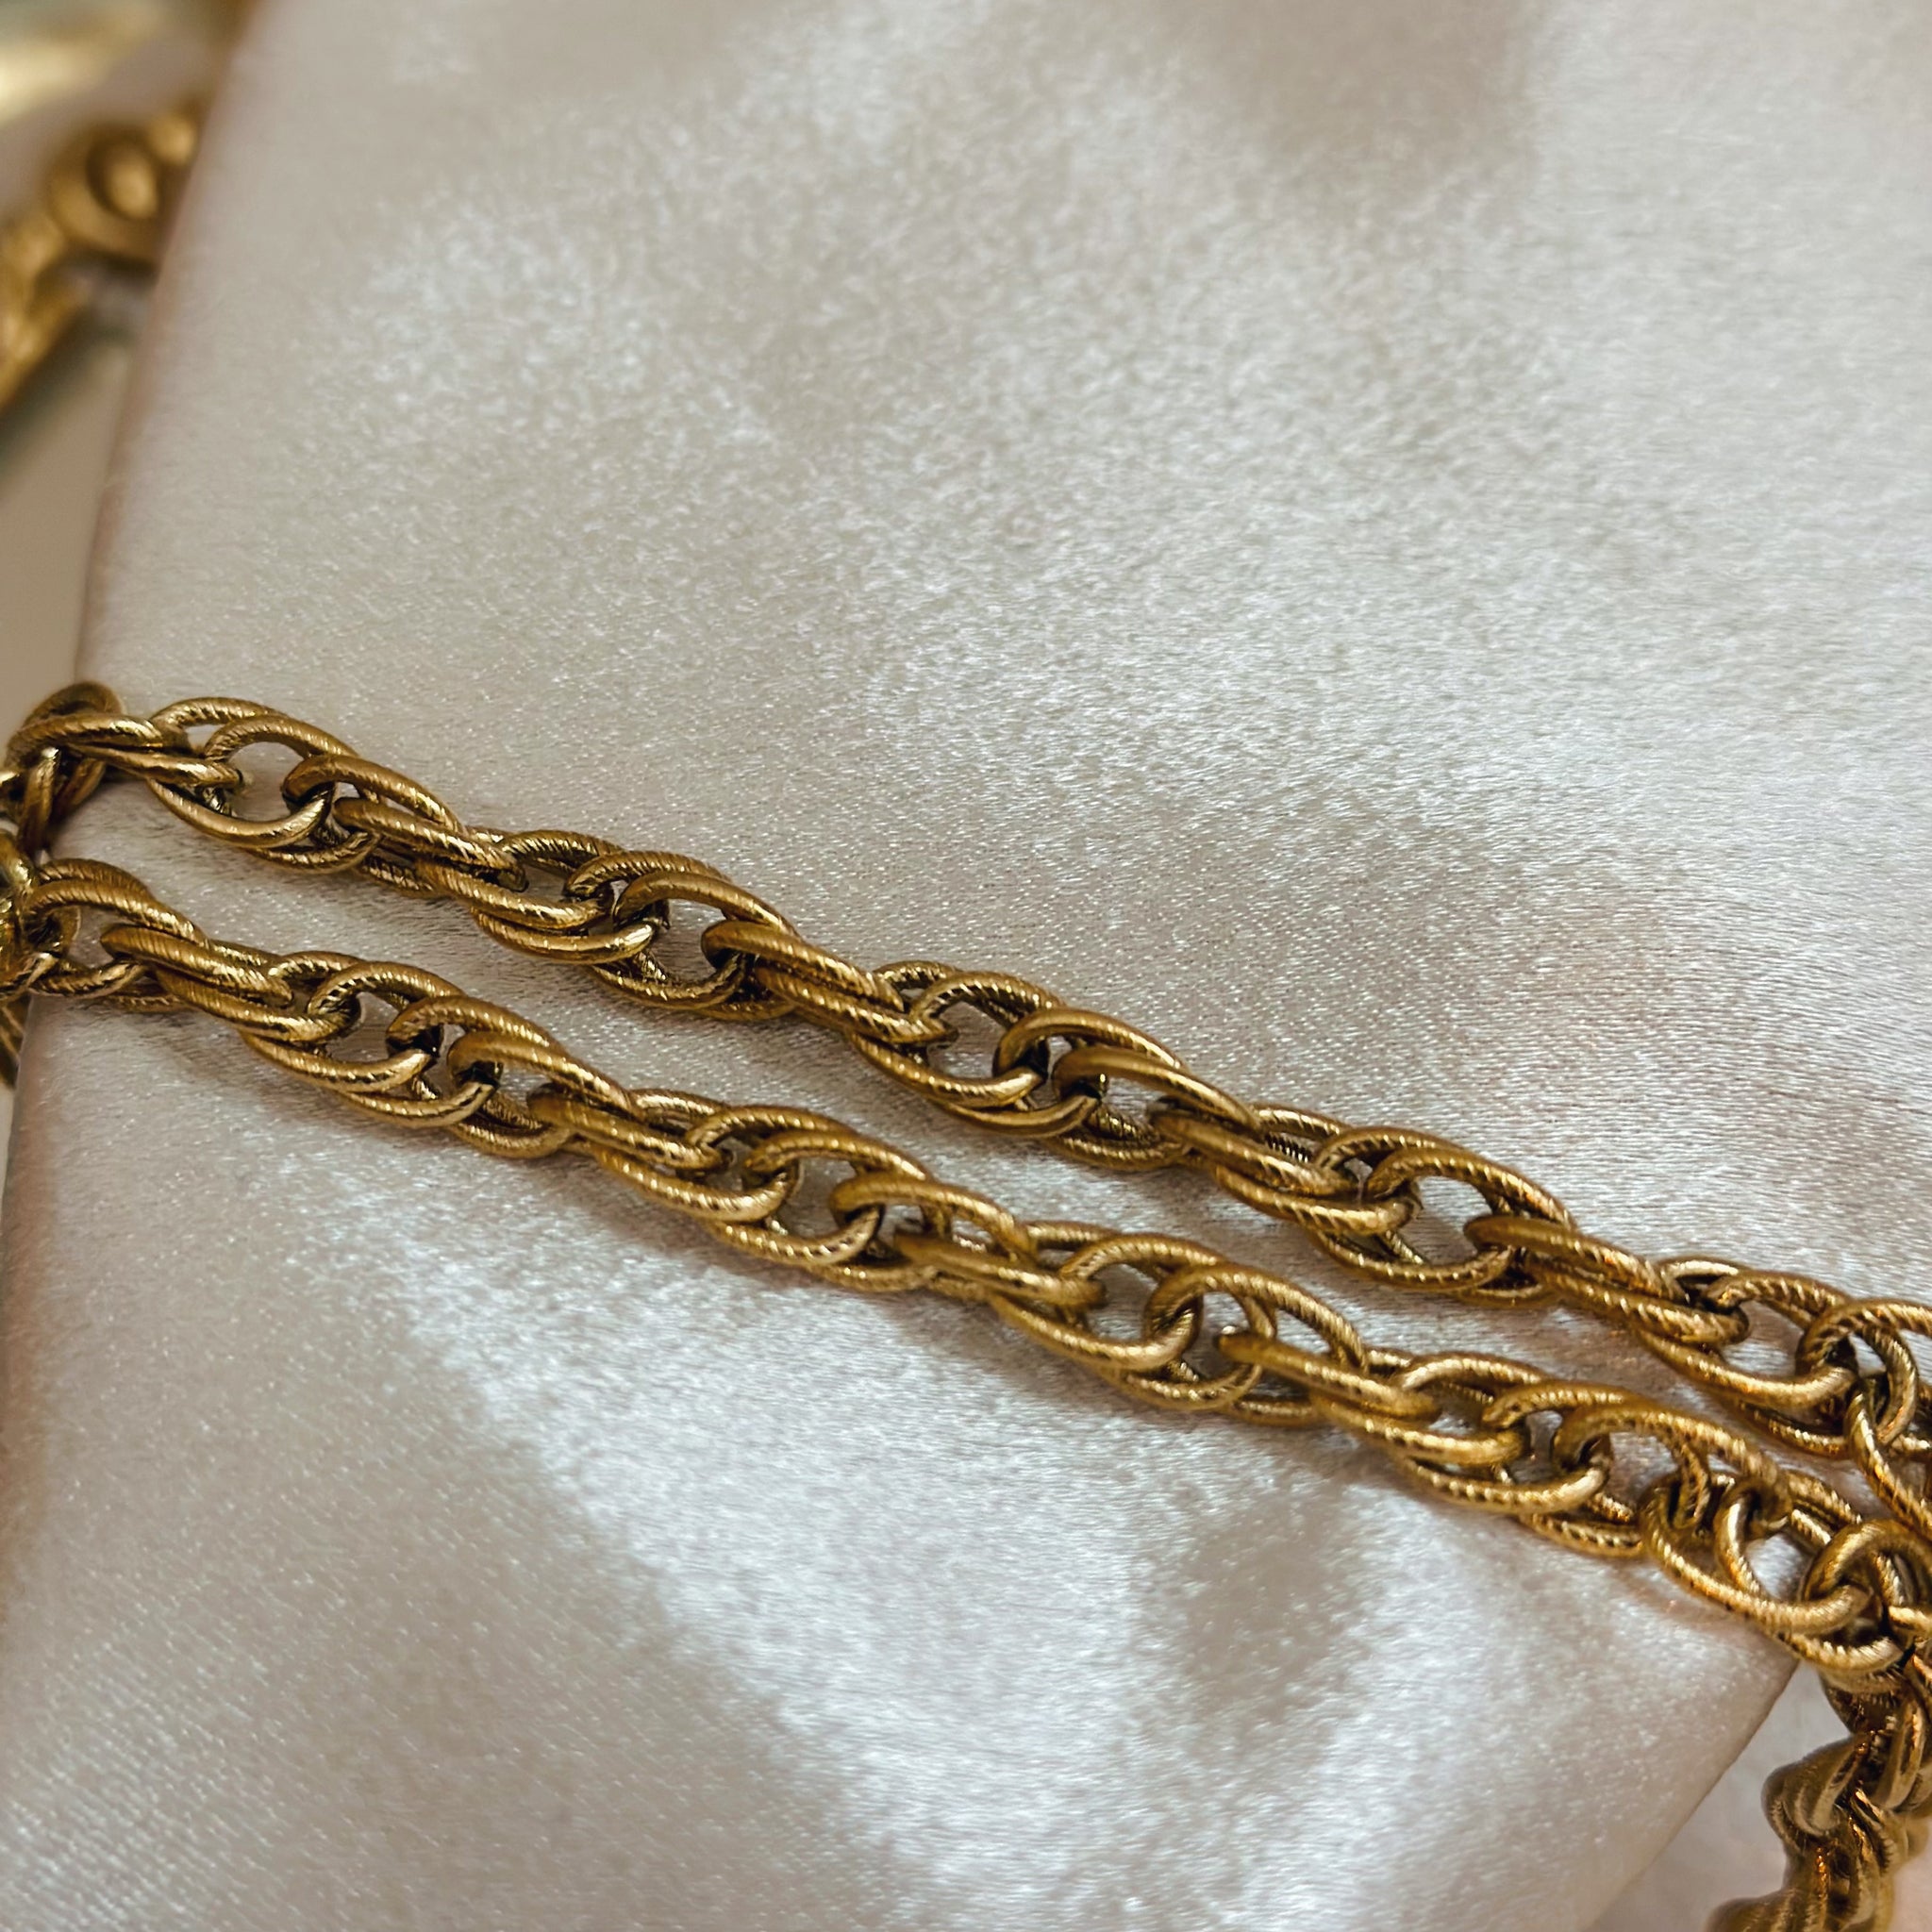 Louis Vuitton Gold Padlock Necklace - Rope Chain